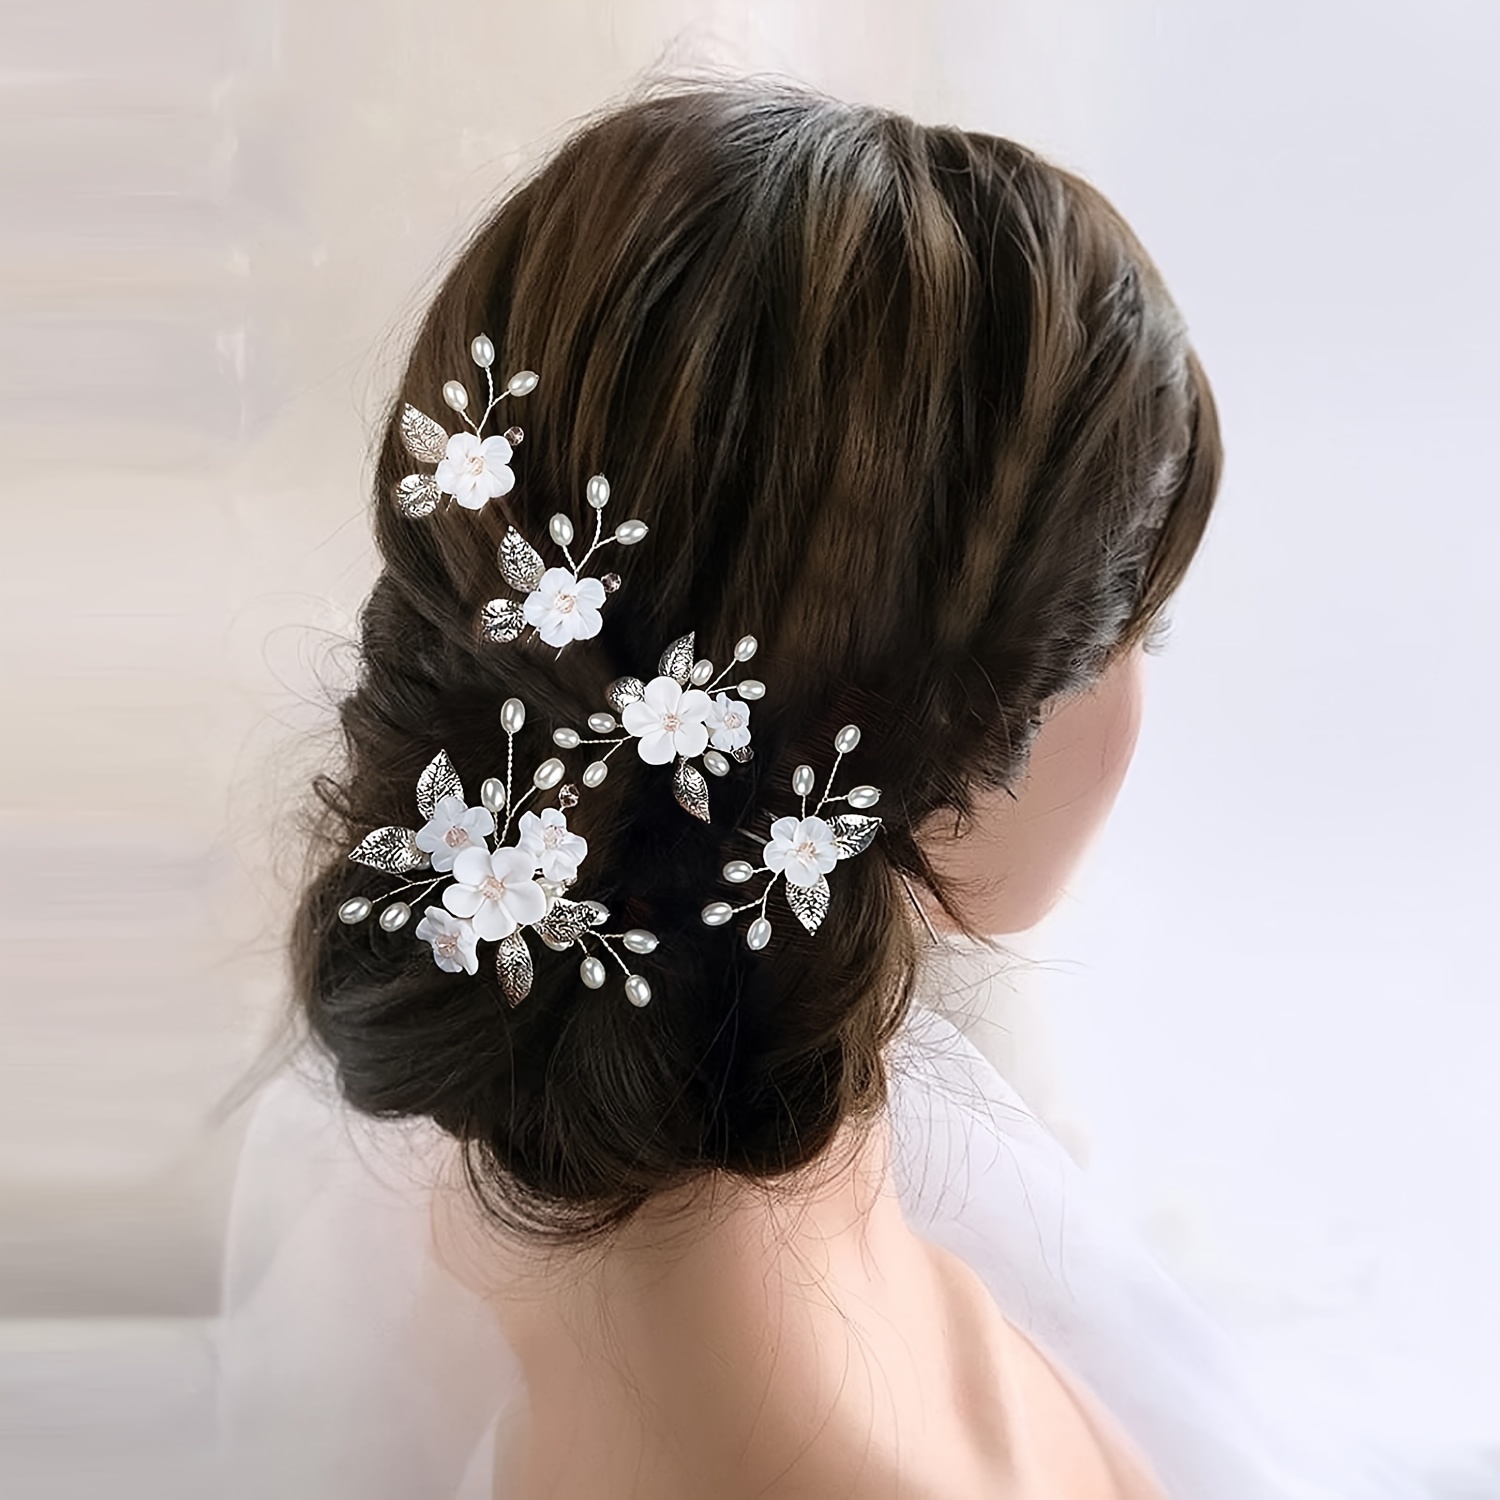 

5pcs A Set Of Soft Pottery White Flower Pink Crystal Hairpin U-shaped Hairpin Insert Needle Headwear For Wedding Party